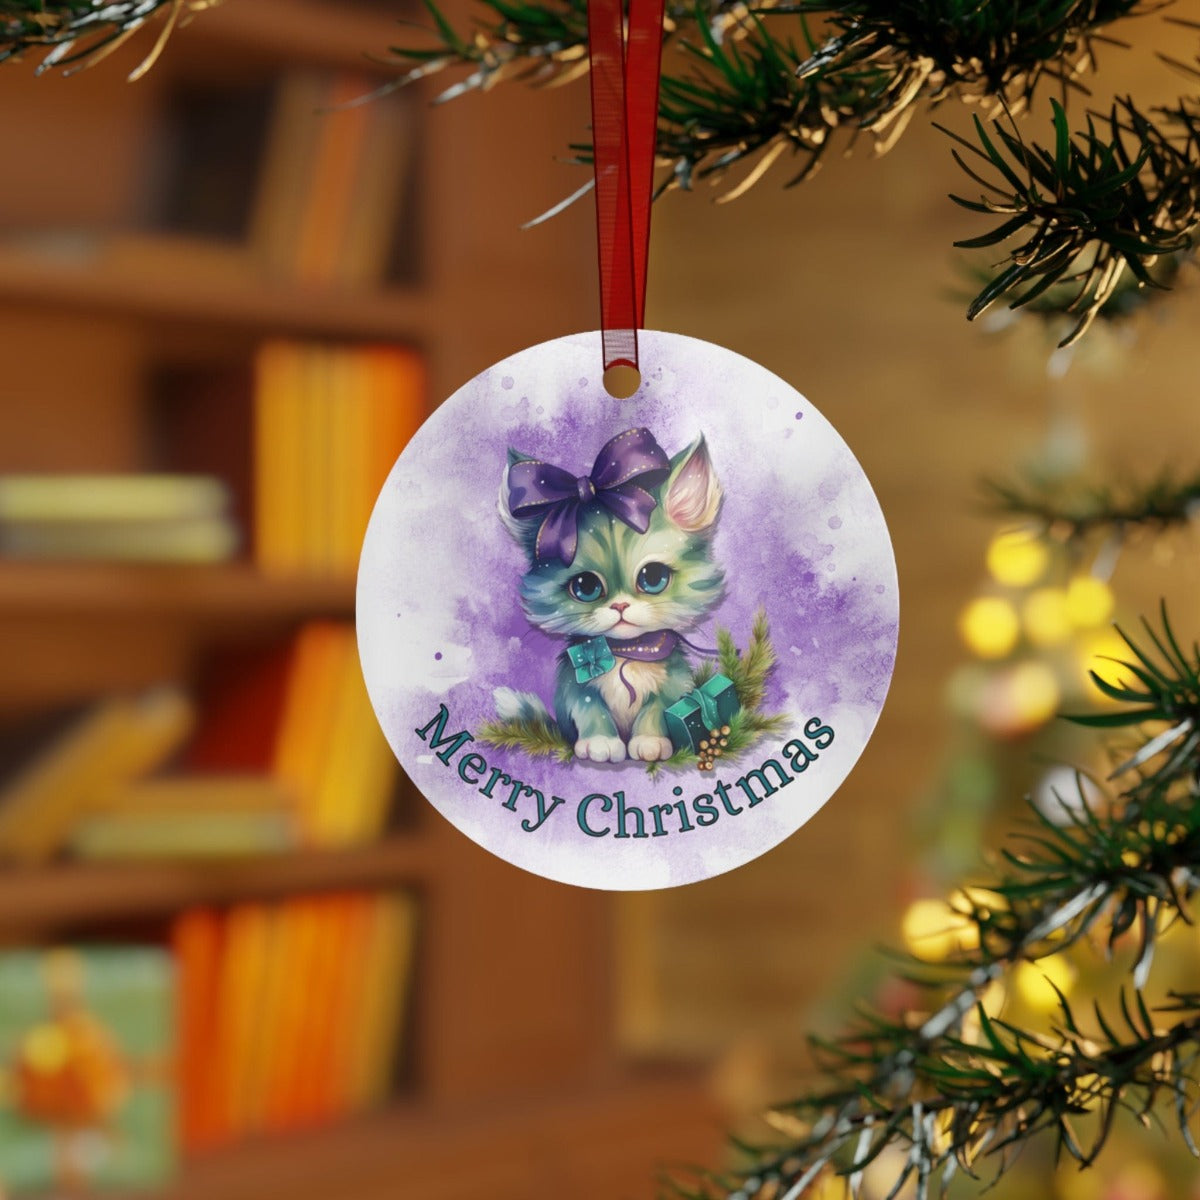 Printify Home Decor Round / One Size Christmas Ornament, Kitten Christmas Ornament, Kitten Gift, Cat Christmas, Custom Ornament, Metal Ornament, Christmas Gift, Free Shipping 22097126526585595838